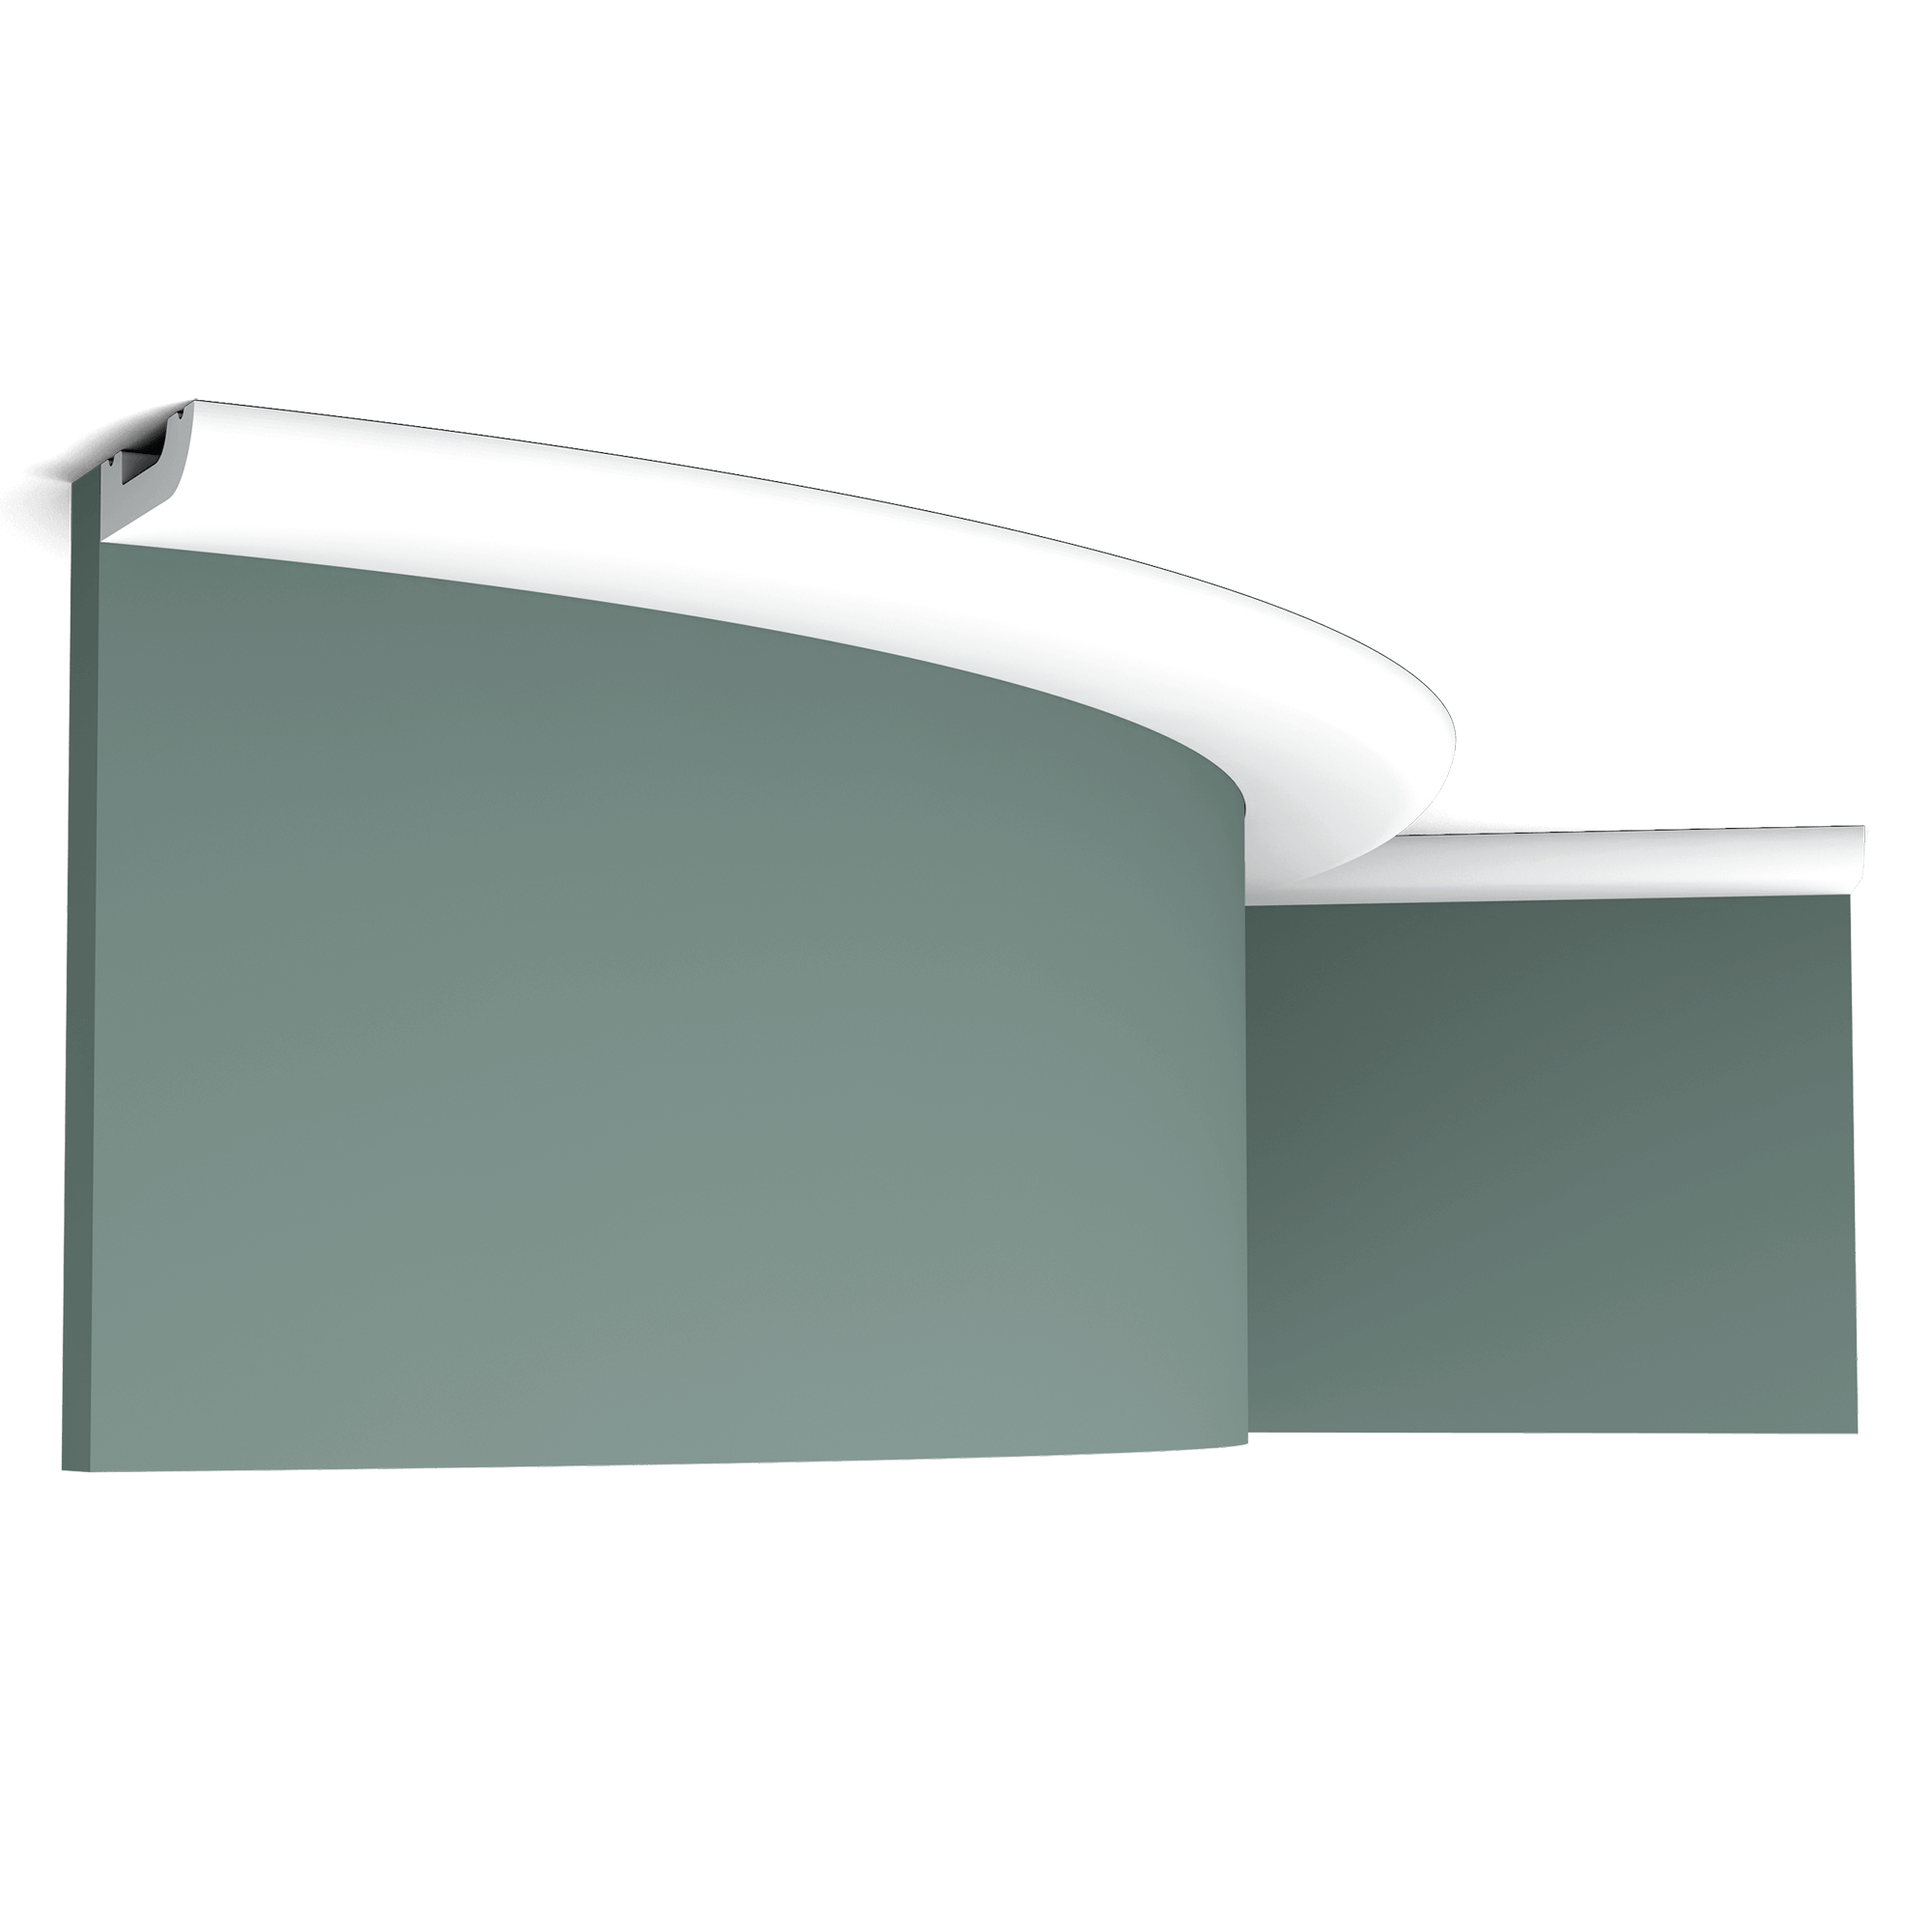 Flexible version of the SX182. This multifunctional cornice moulding with rounded top provides endless possibilities. Thanks to its Flex technology, curved walls and surfaces are no problem. Installation remark: It is necessary to screw this profile on the wall. Flex Radius: R min = 35 cm, R* min = 100 cm